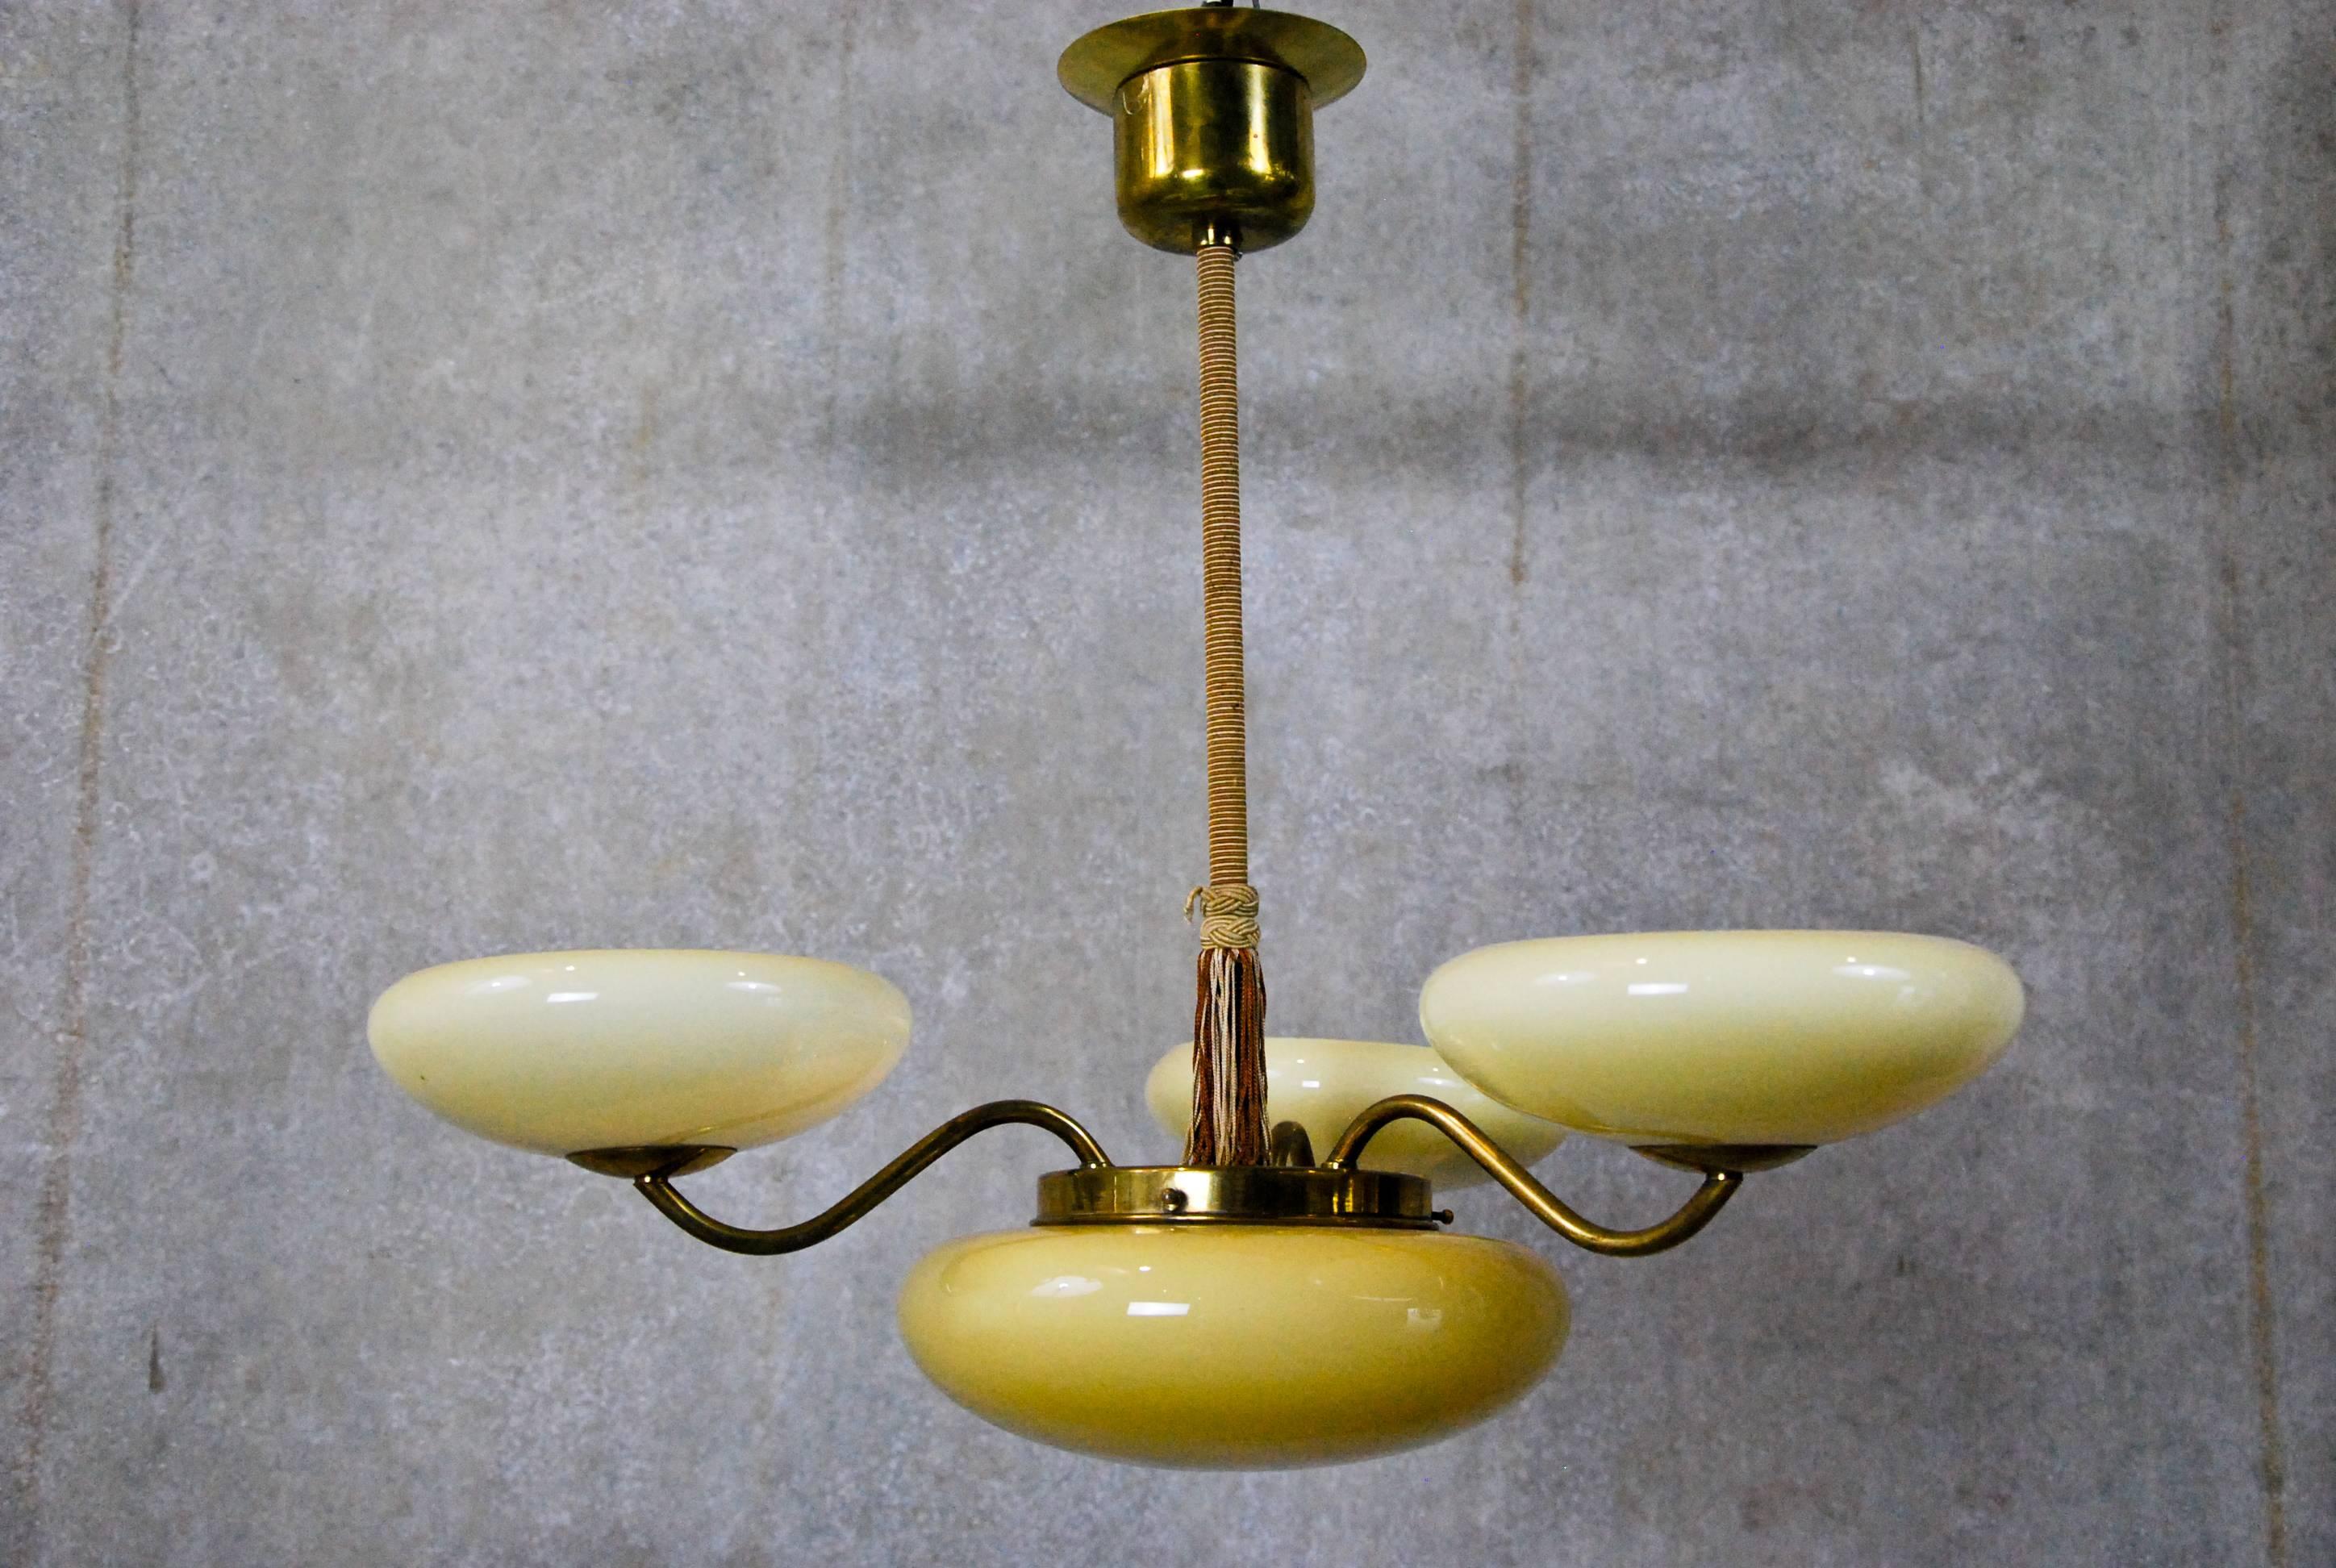 A three-light, brass and amber glass chandelier with adjustable arms. Hollywood Regency style; probably from the 1940s.
Amber cased glass is typical of Italian (Murano) glass of that period.
Great transitional chandelier.
Note- cloth threaded